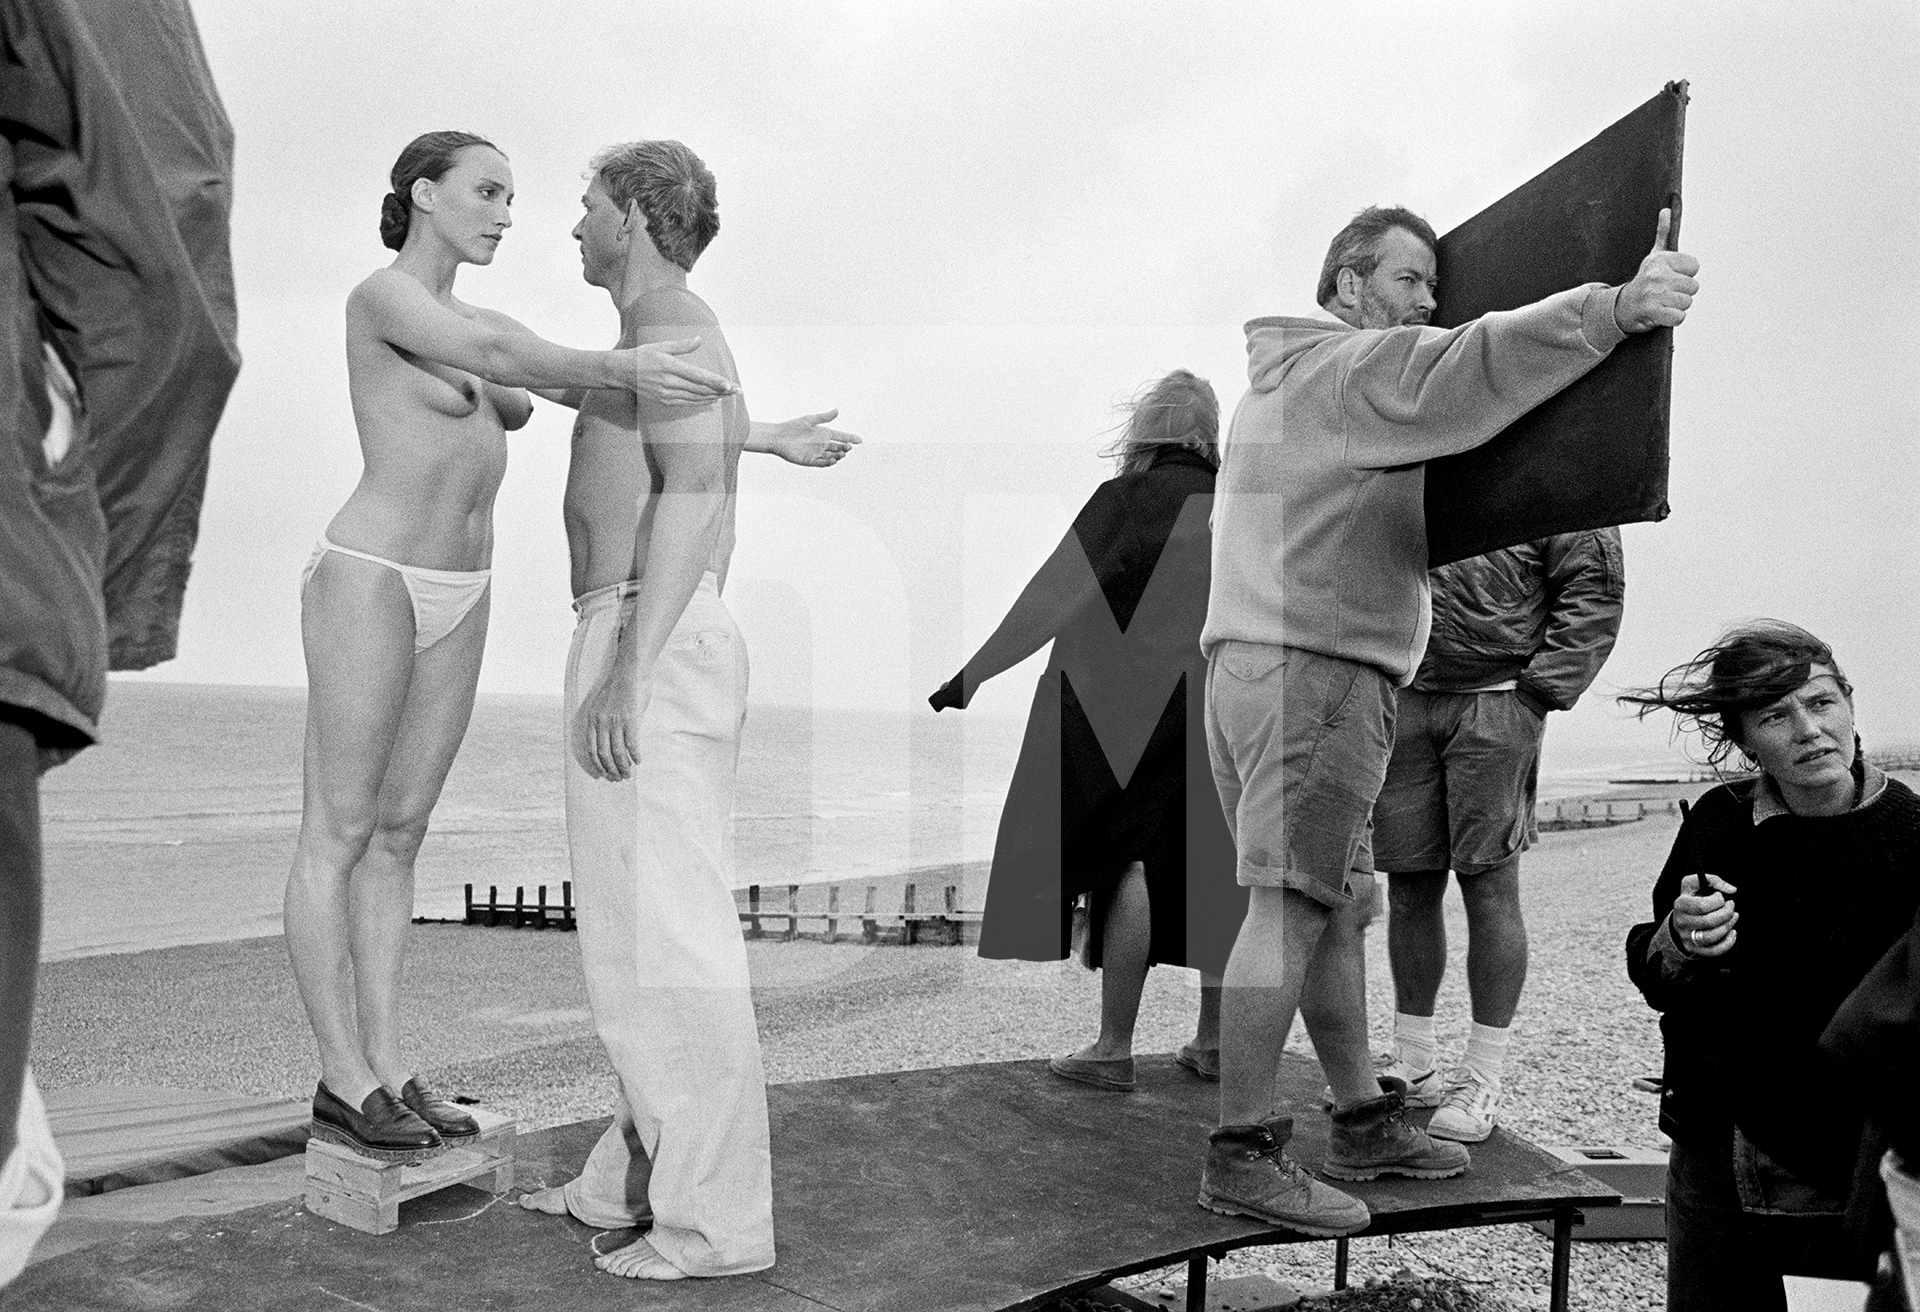 Amanda King [Slava] and Patrick Ryecart [Bohuslav Martinů], setting up the shot on location. Broomhill, East Camber Sands, East Sussex. Ken Russell’s ‘The Mystery of Doctor Martinu’, September 1991 by Daniel Meadows